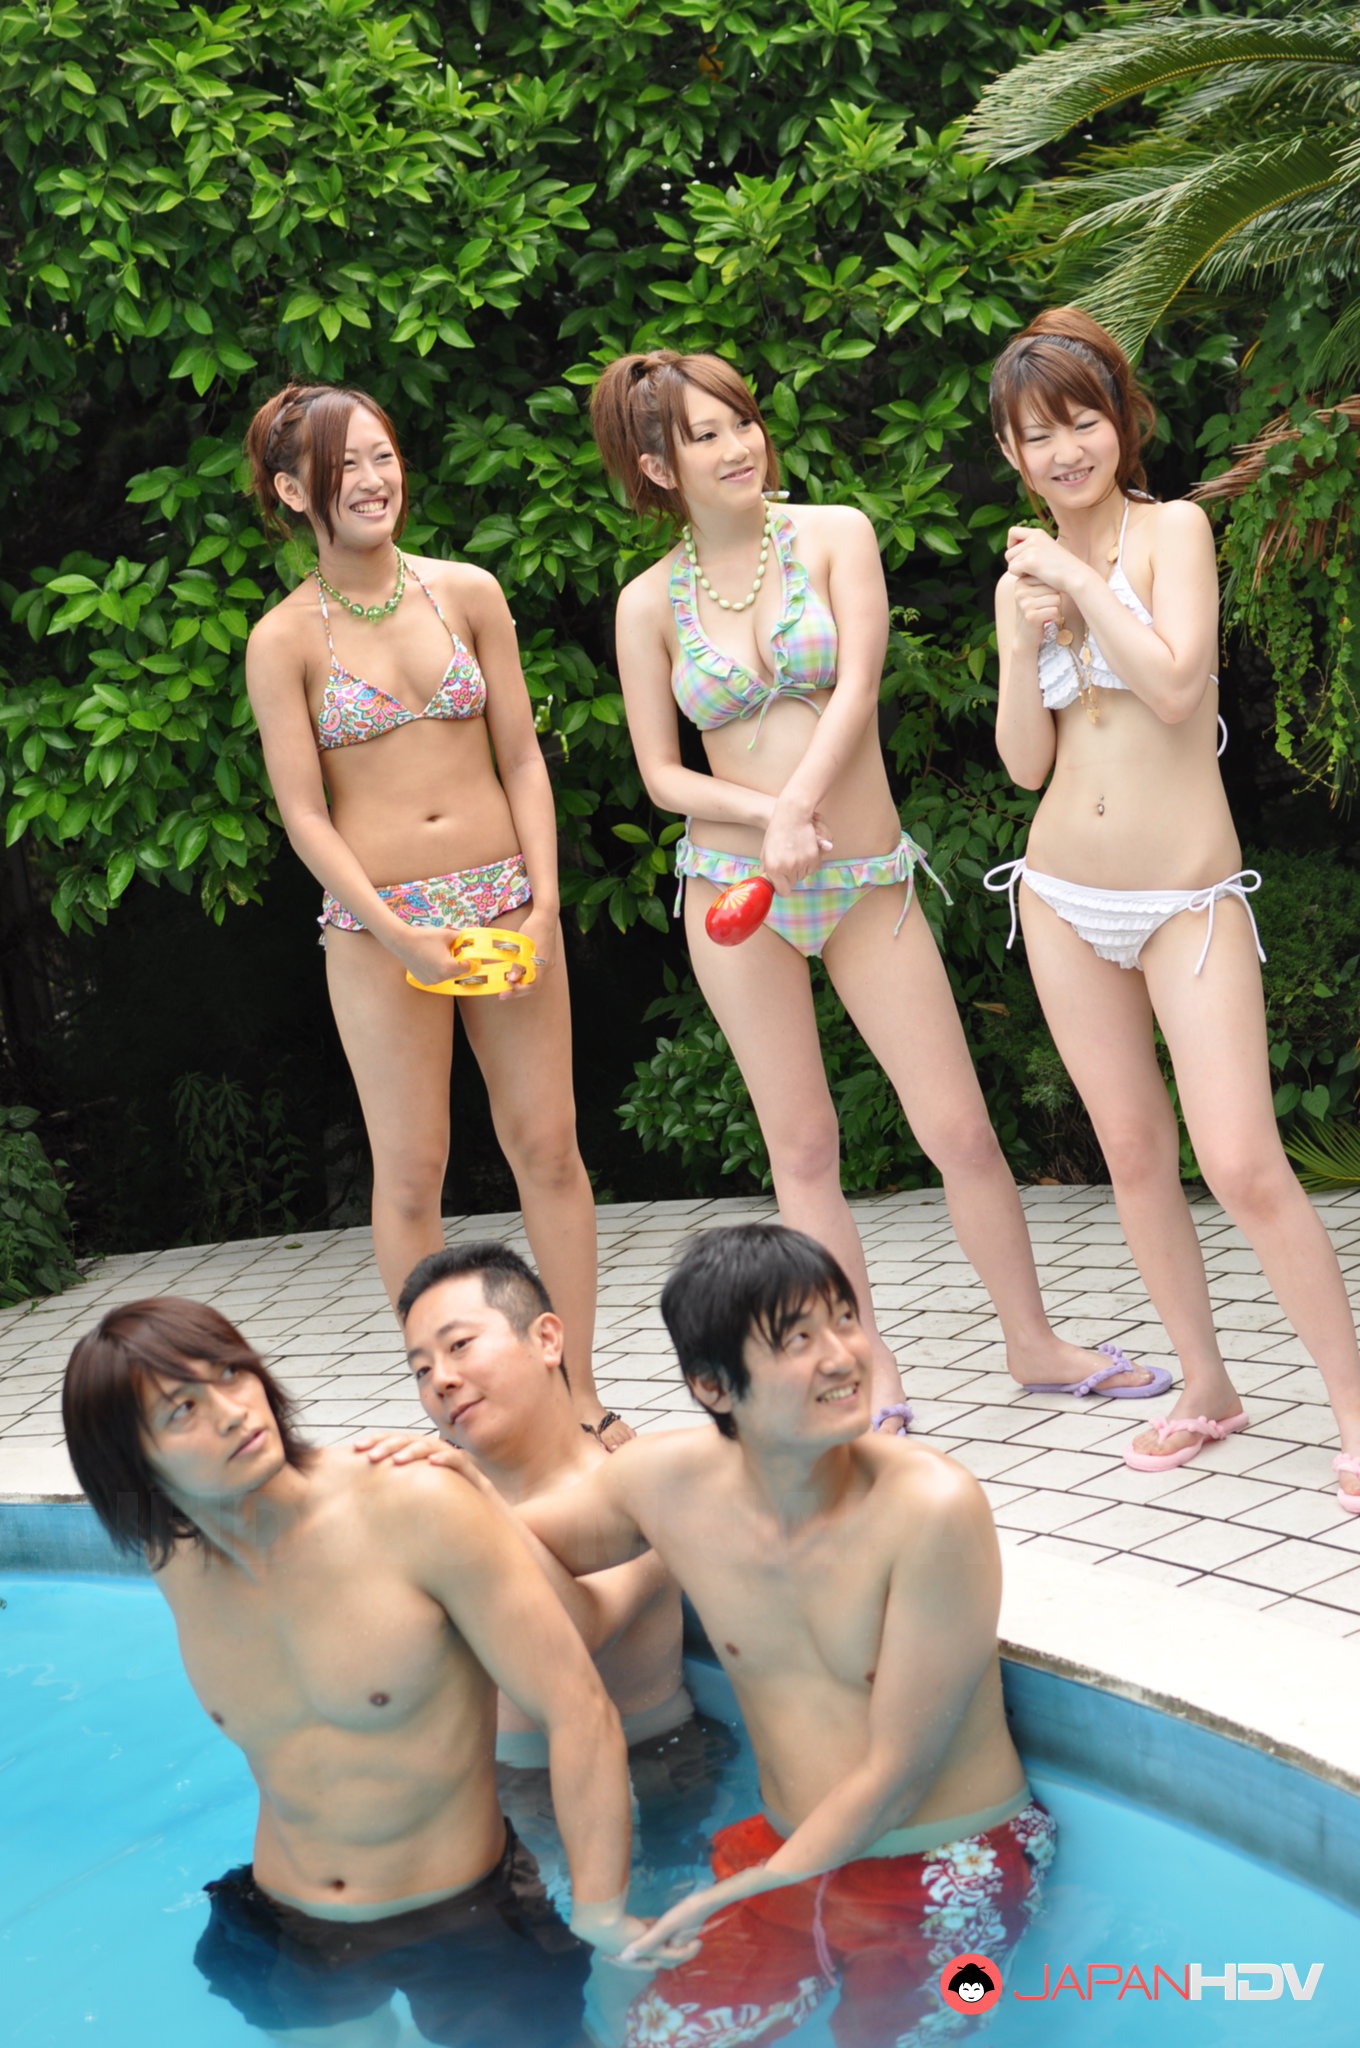 Swimming Pool Sex Party Porn - Japanese girls enjoy in some sexy pool party